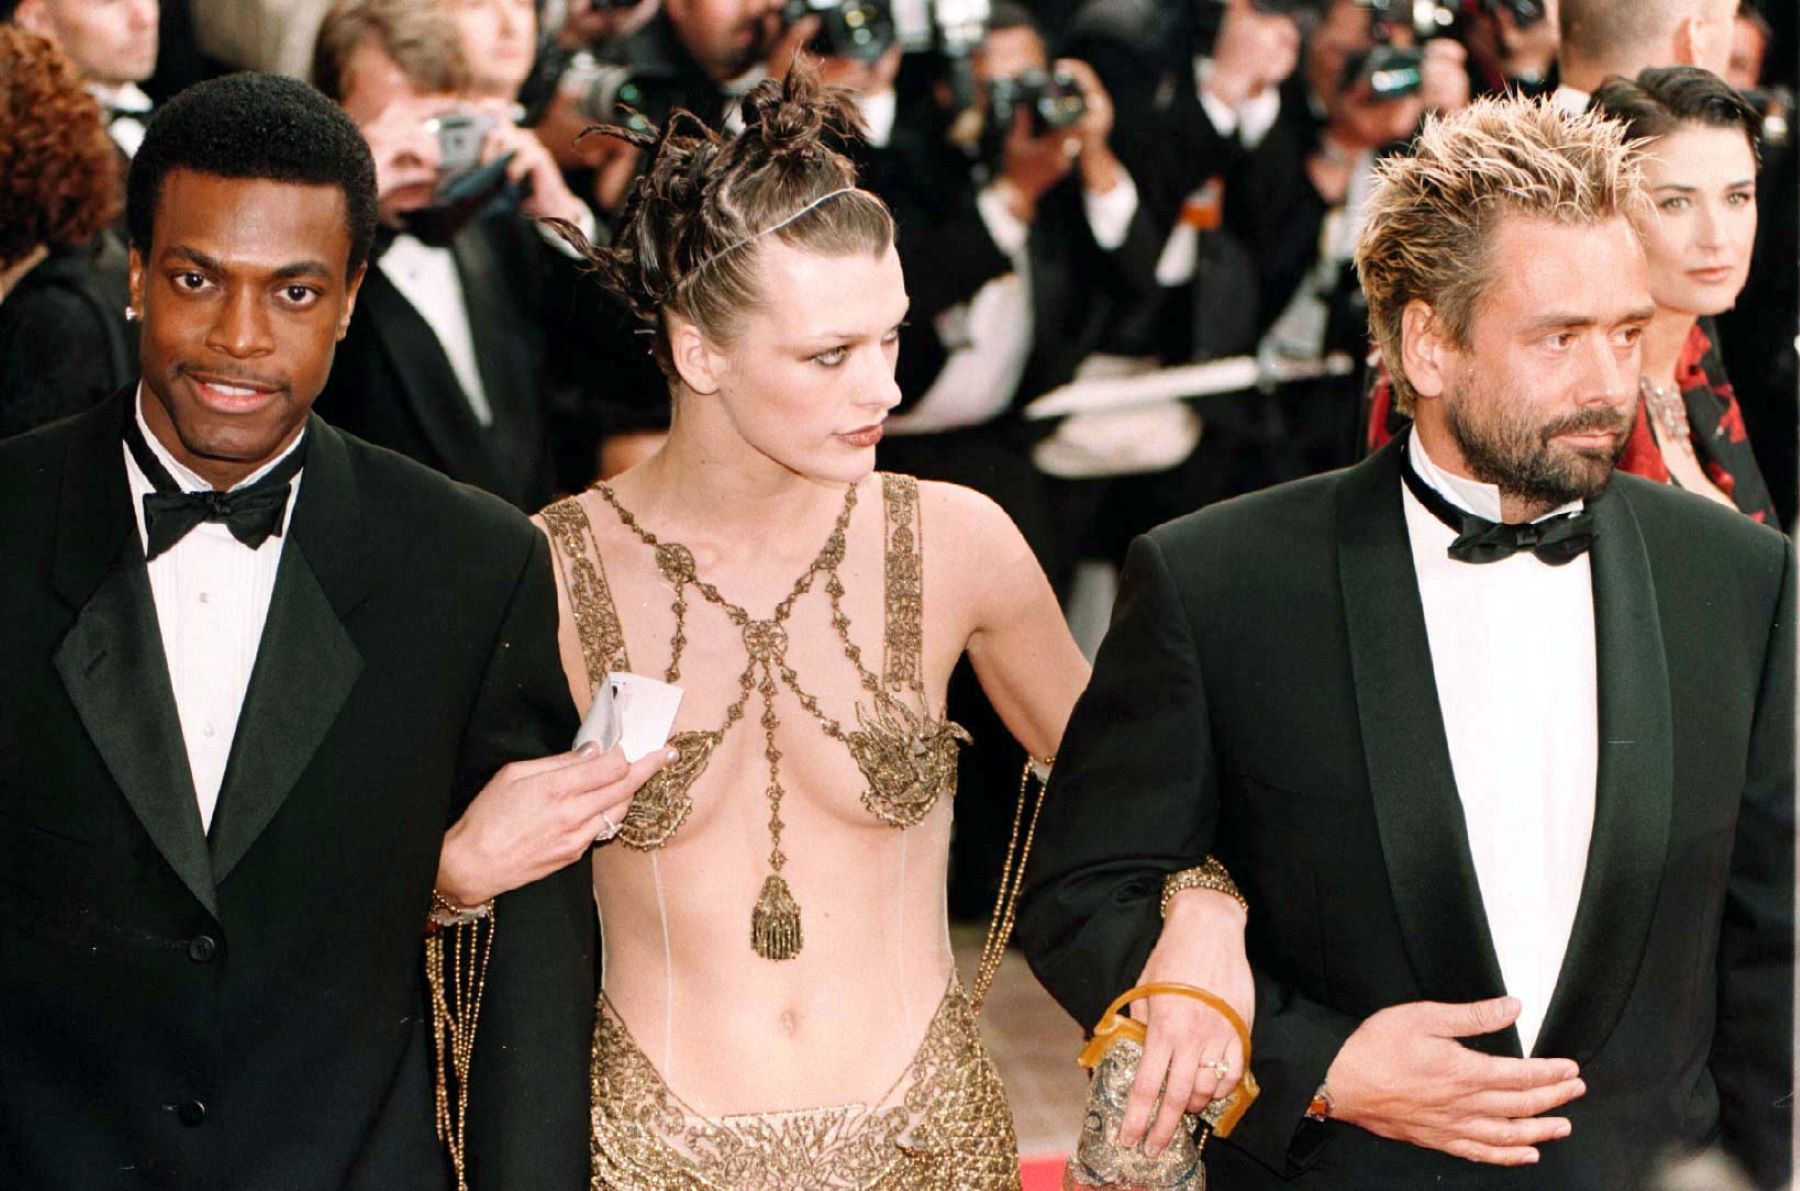 Chris Tucker, Milla Jovovich, and Luc Besson at 'The Fifth Element' premiere at the 50th Cannes Film Festival